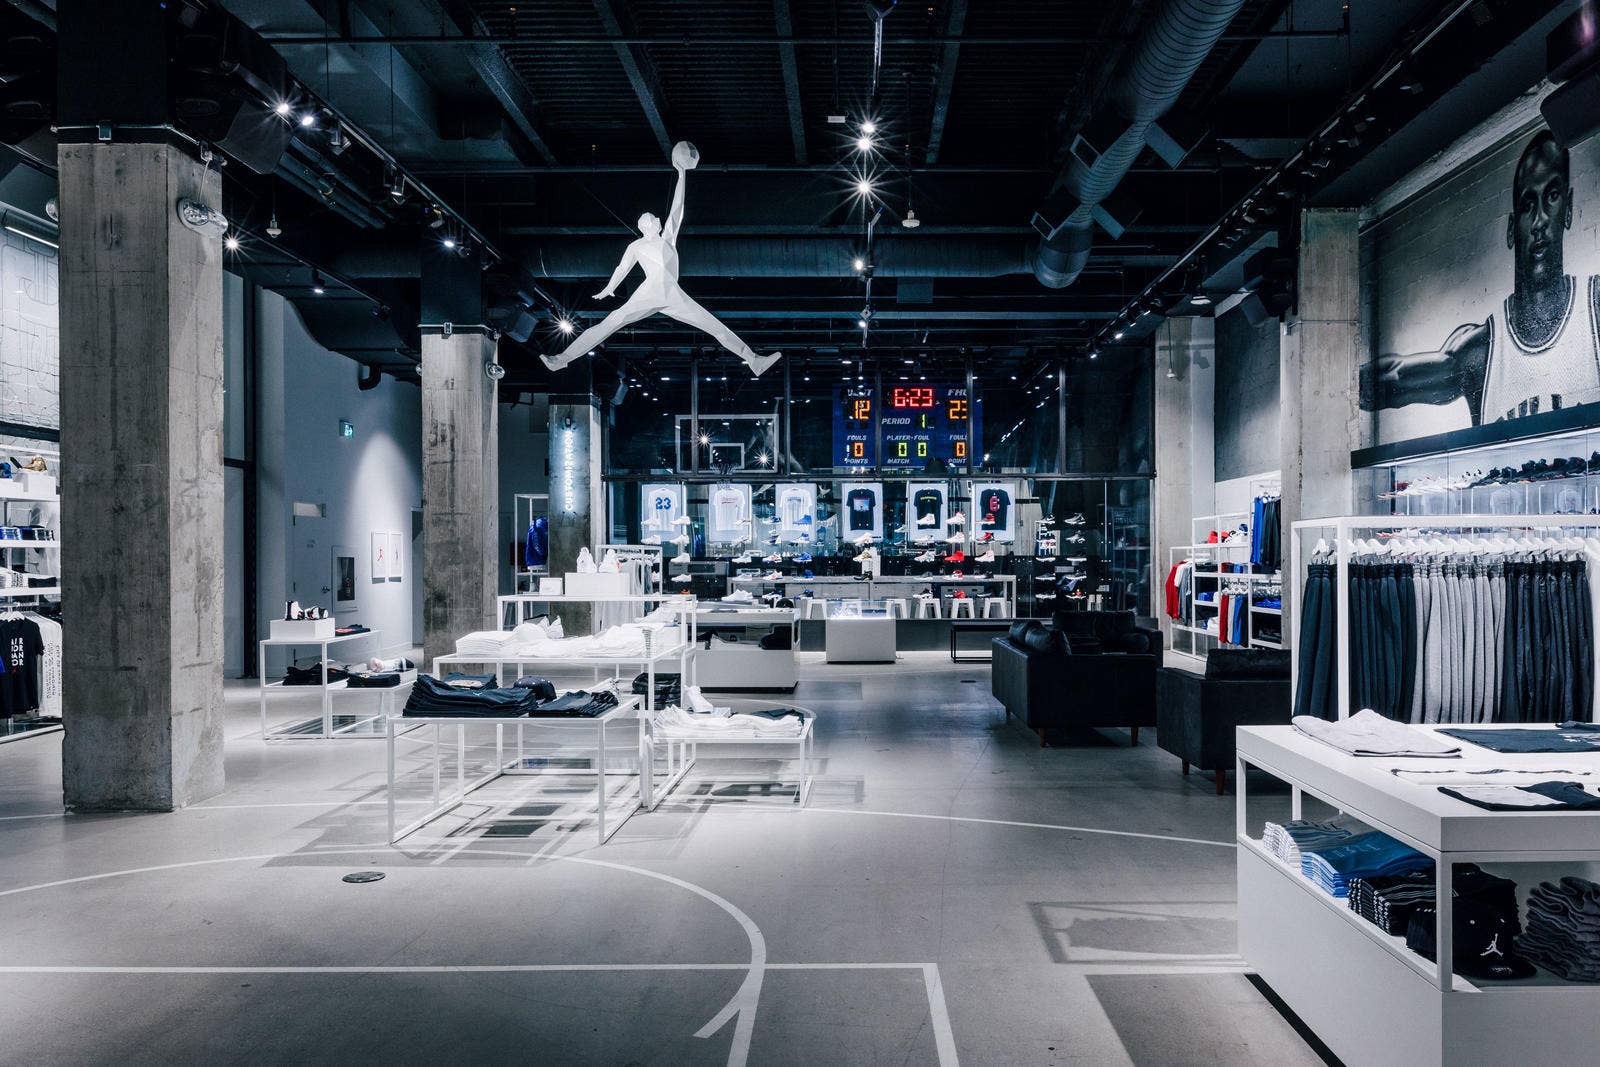 Take A Look Inside Canada’s First Permanent Jordan Brand Store In ...